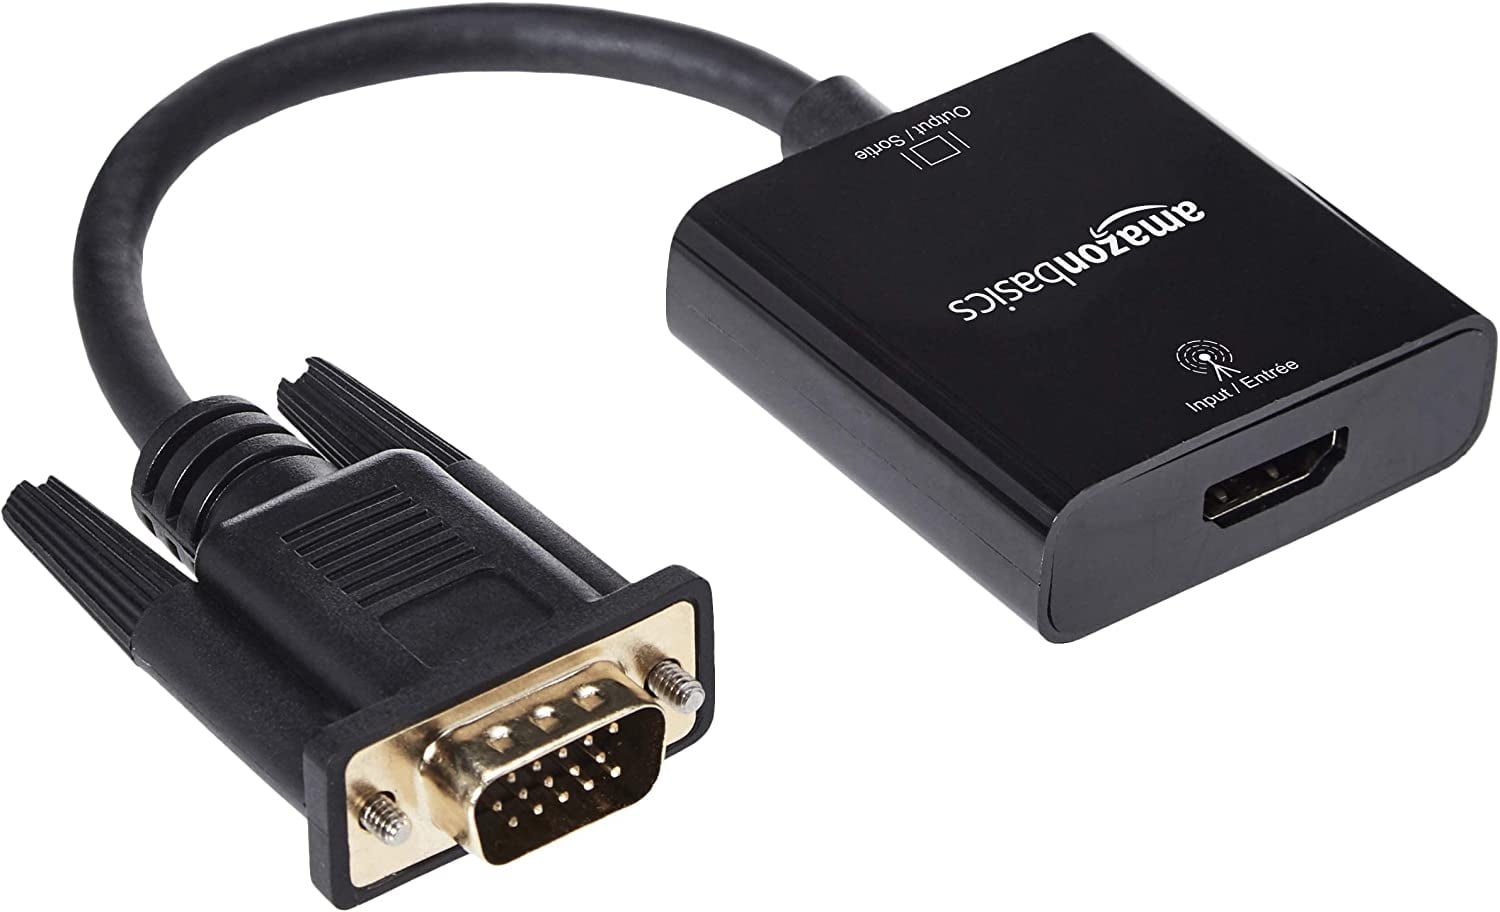 Gold-Plated HDMI (Female) VGA Adapter 3.5mm Audio Port from HDMI to VGA) - Walmart.com